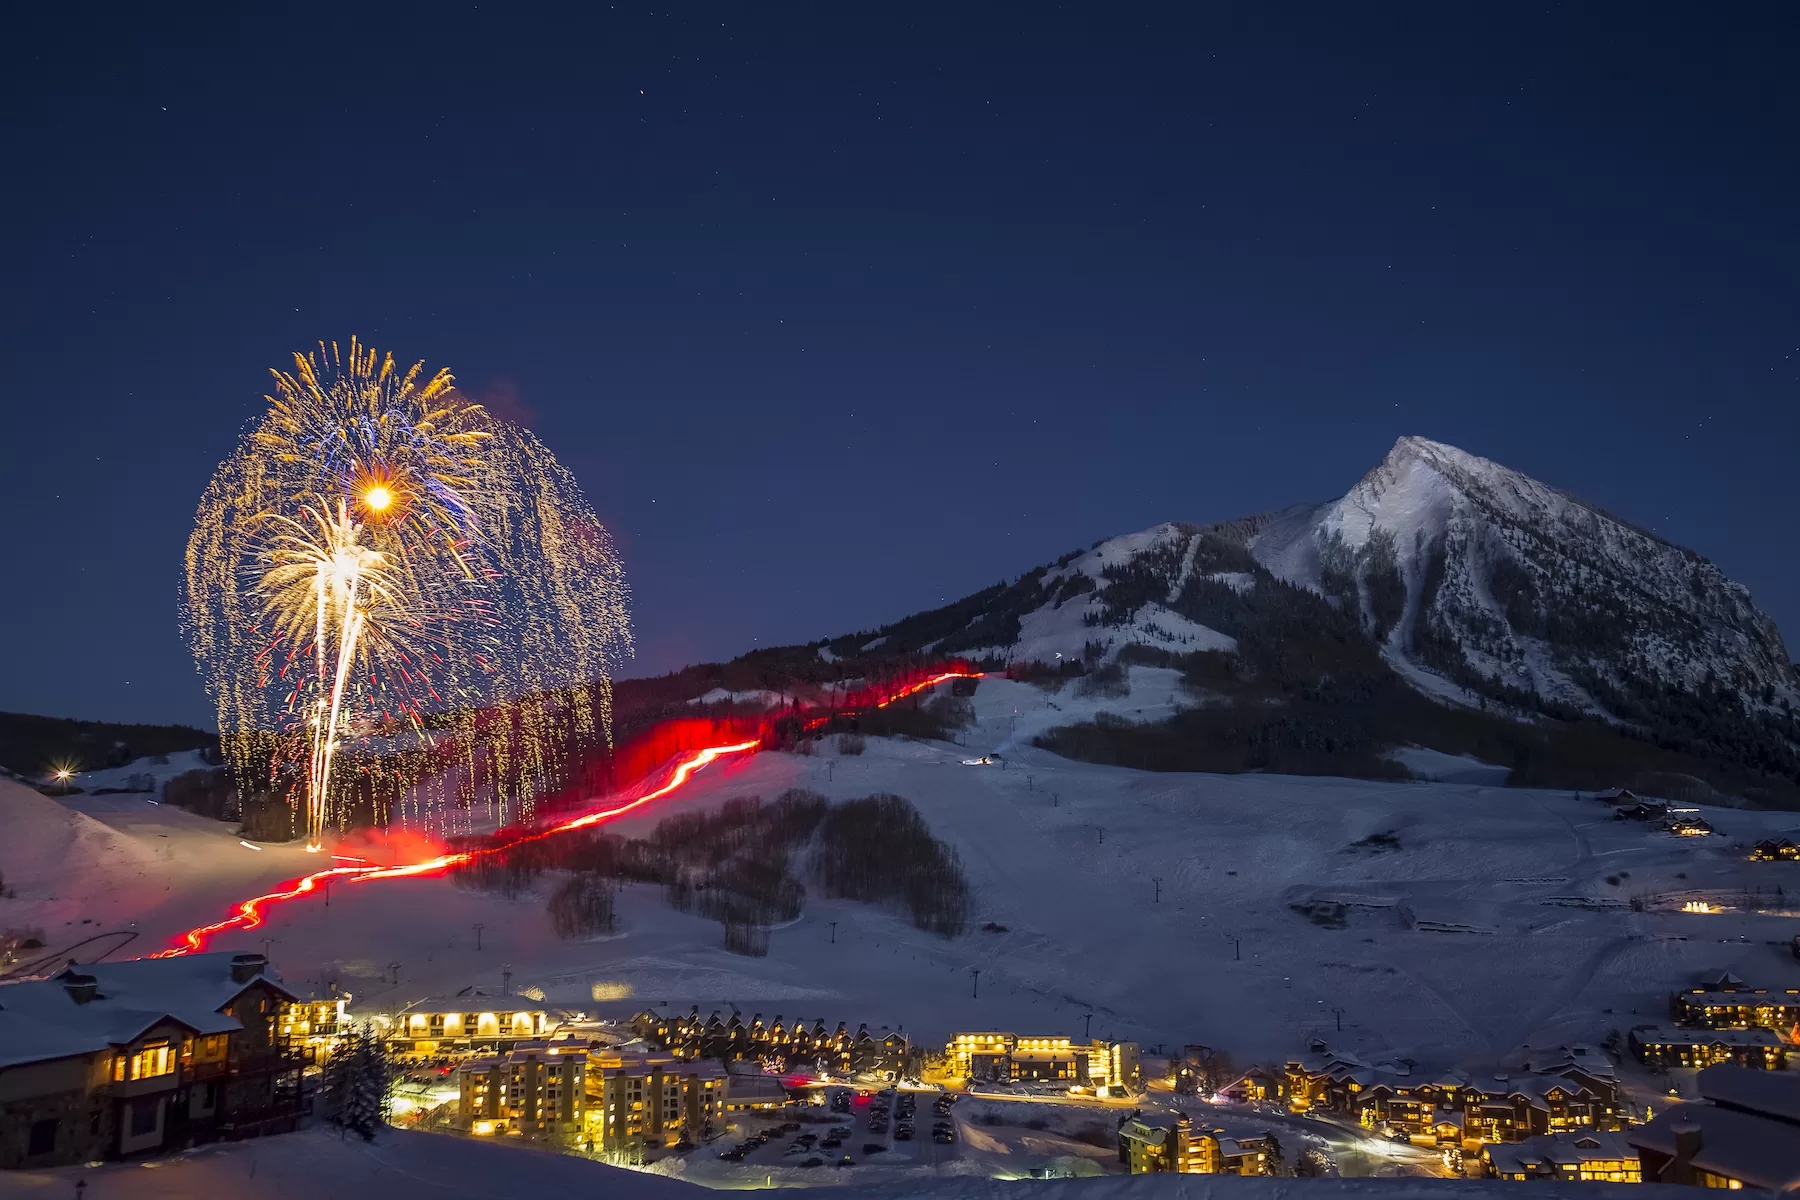 A red line of lights going down a mountain. There is a firework going off and a mountain peak in the background